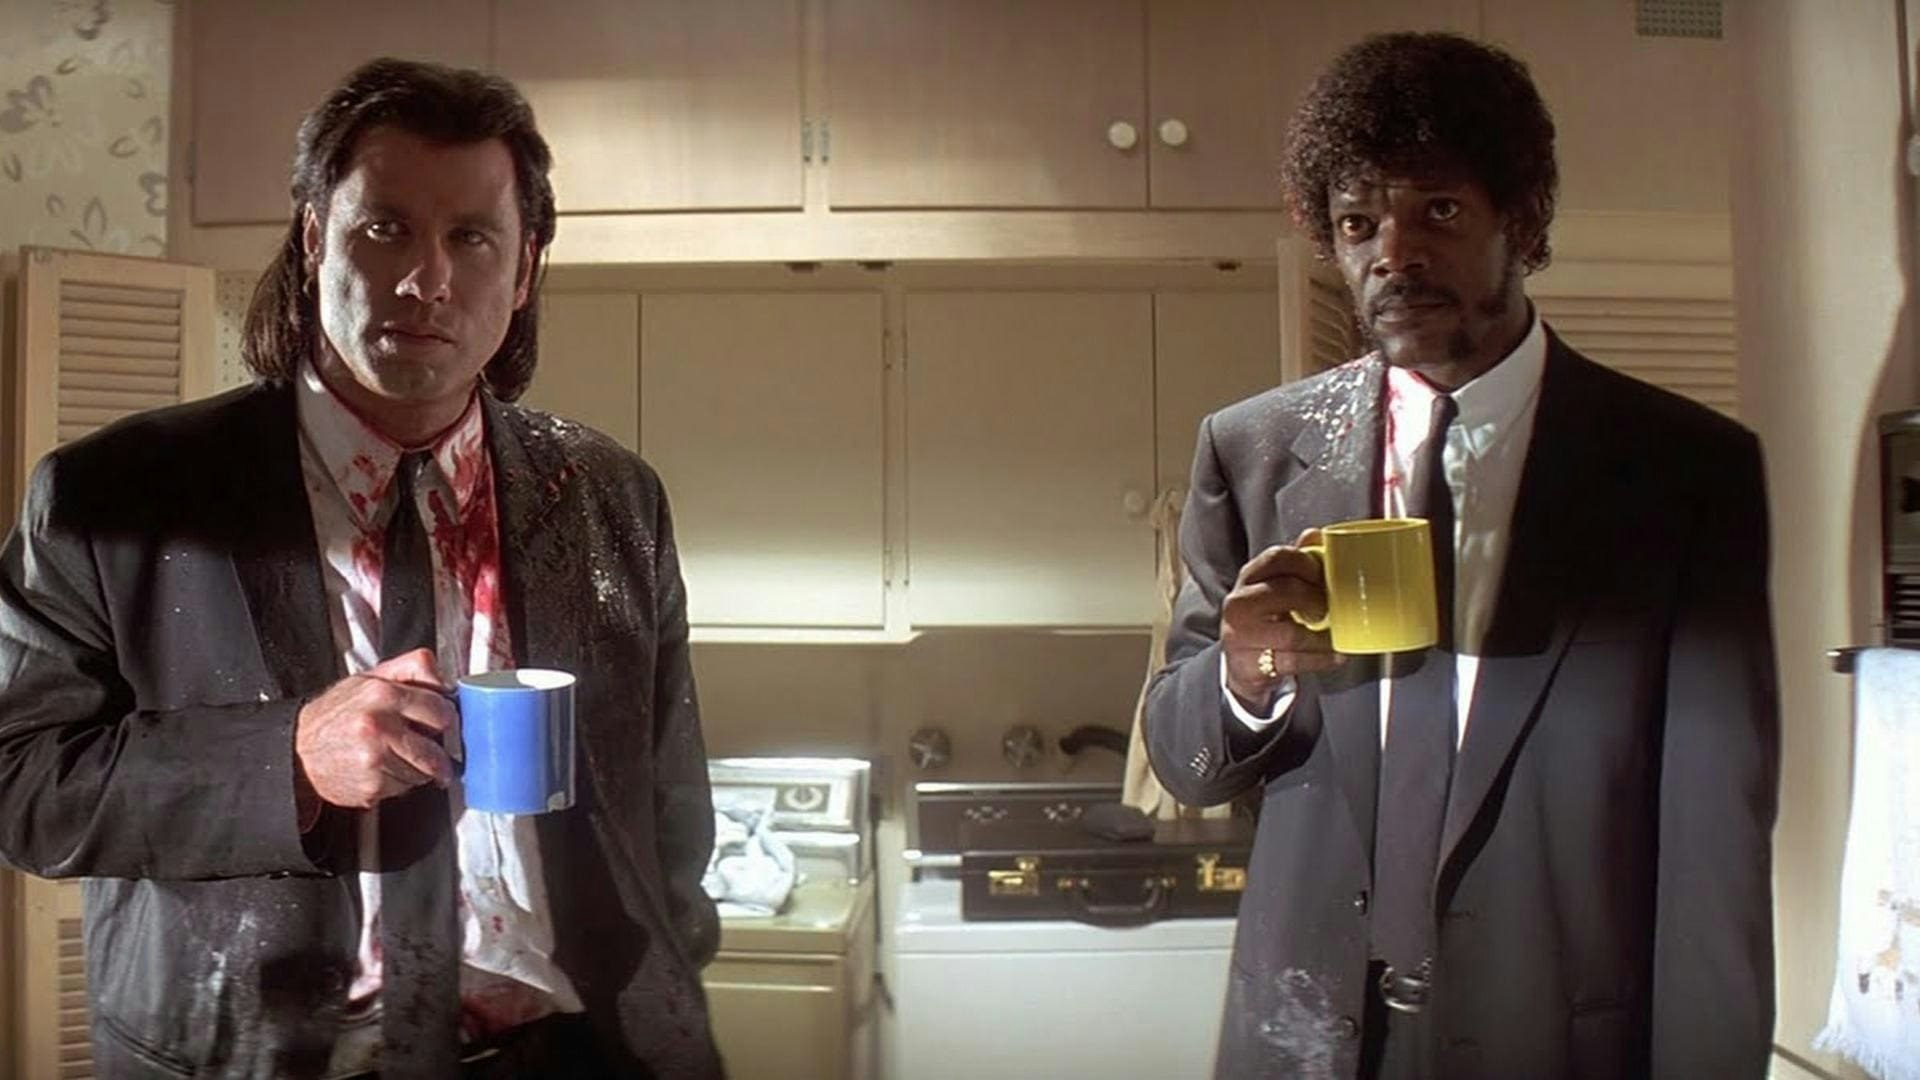 Vincent Vega (John Travolta) and Jules Winnfield (Samuel L. Jackson) drinking coffee while covered in blood in a kitchen in 'Pulp Fiction'